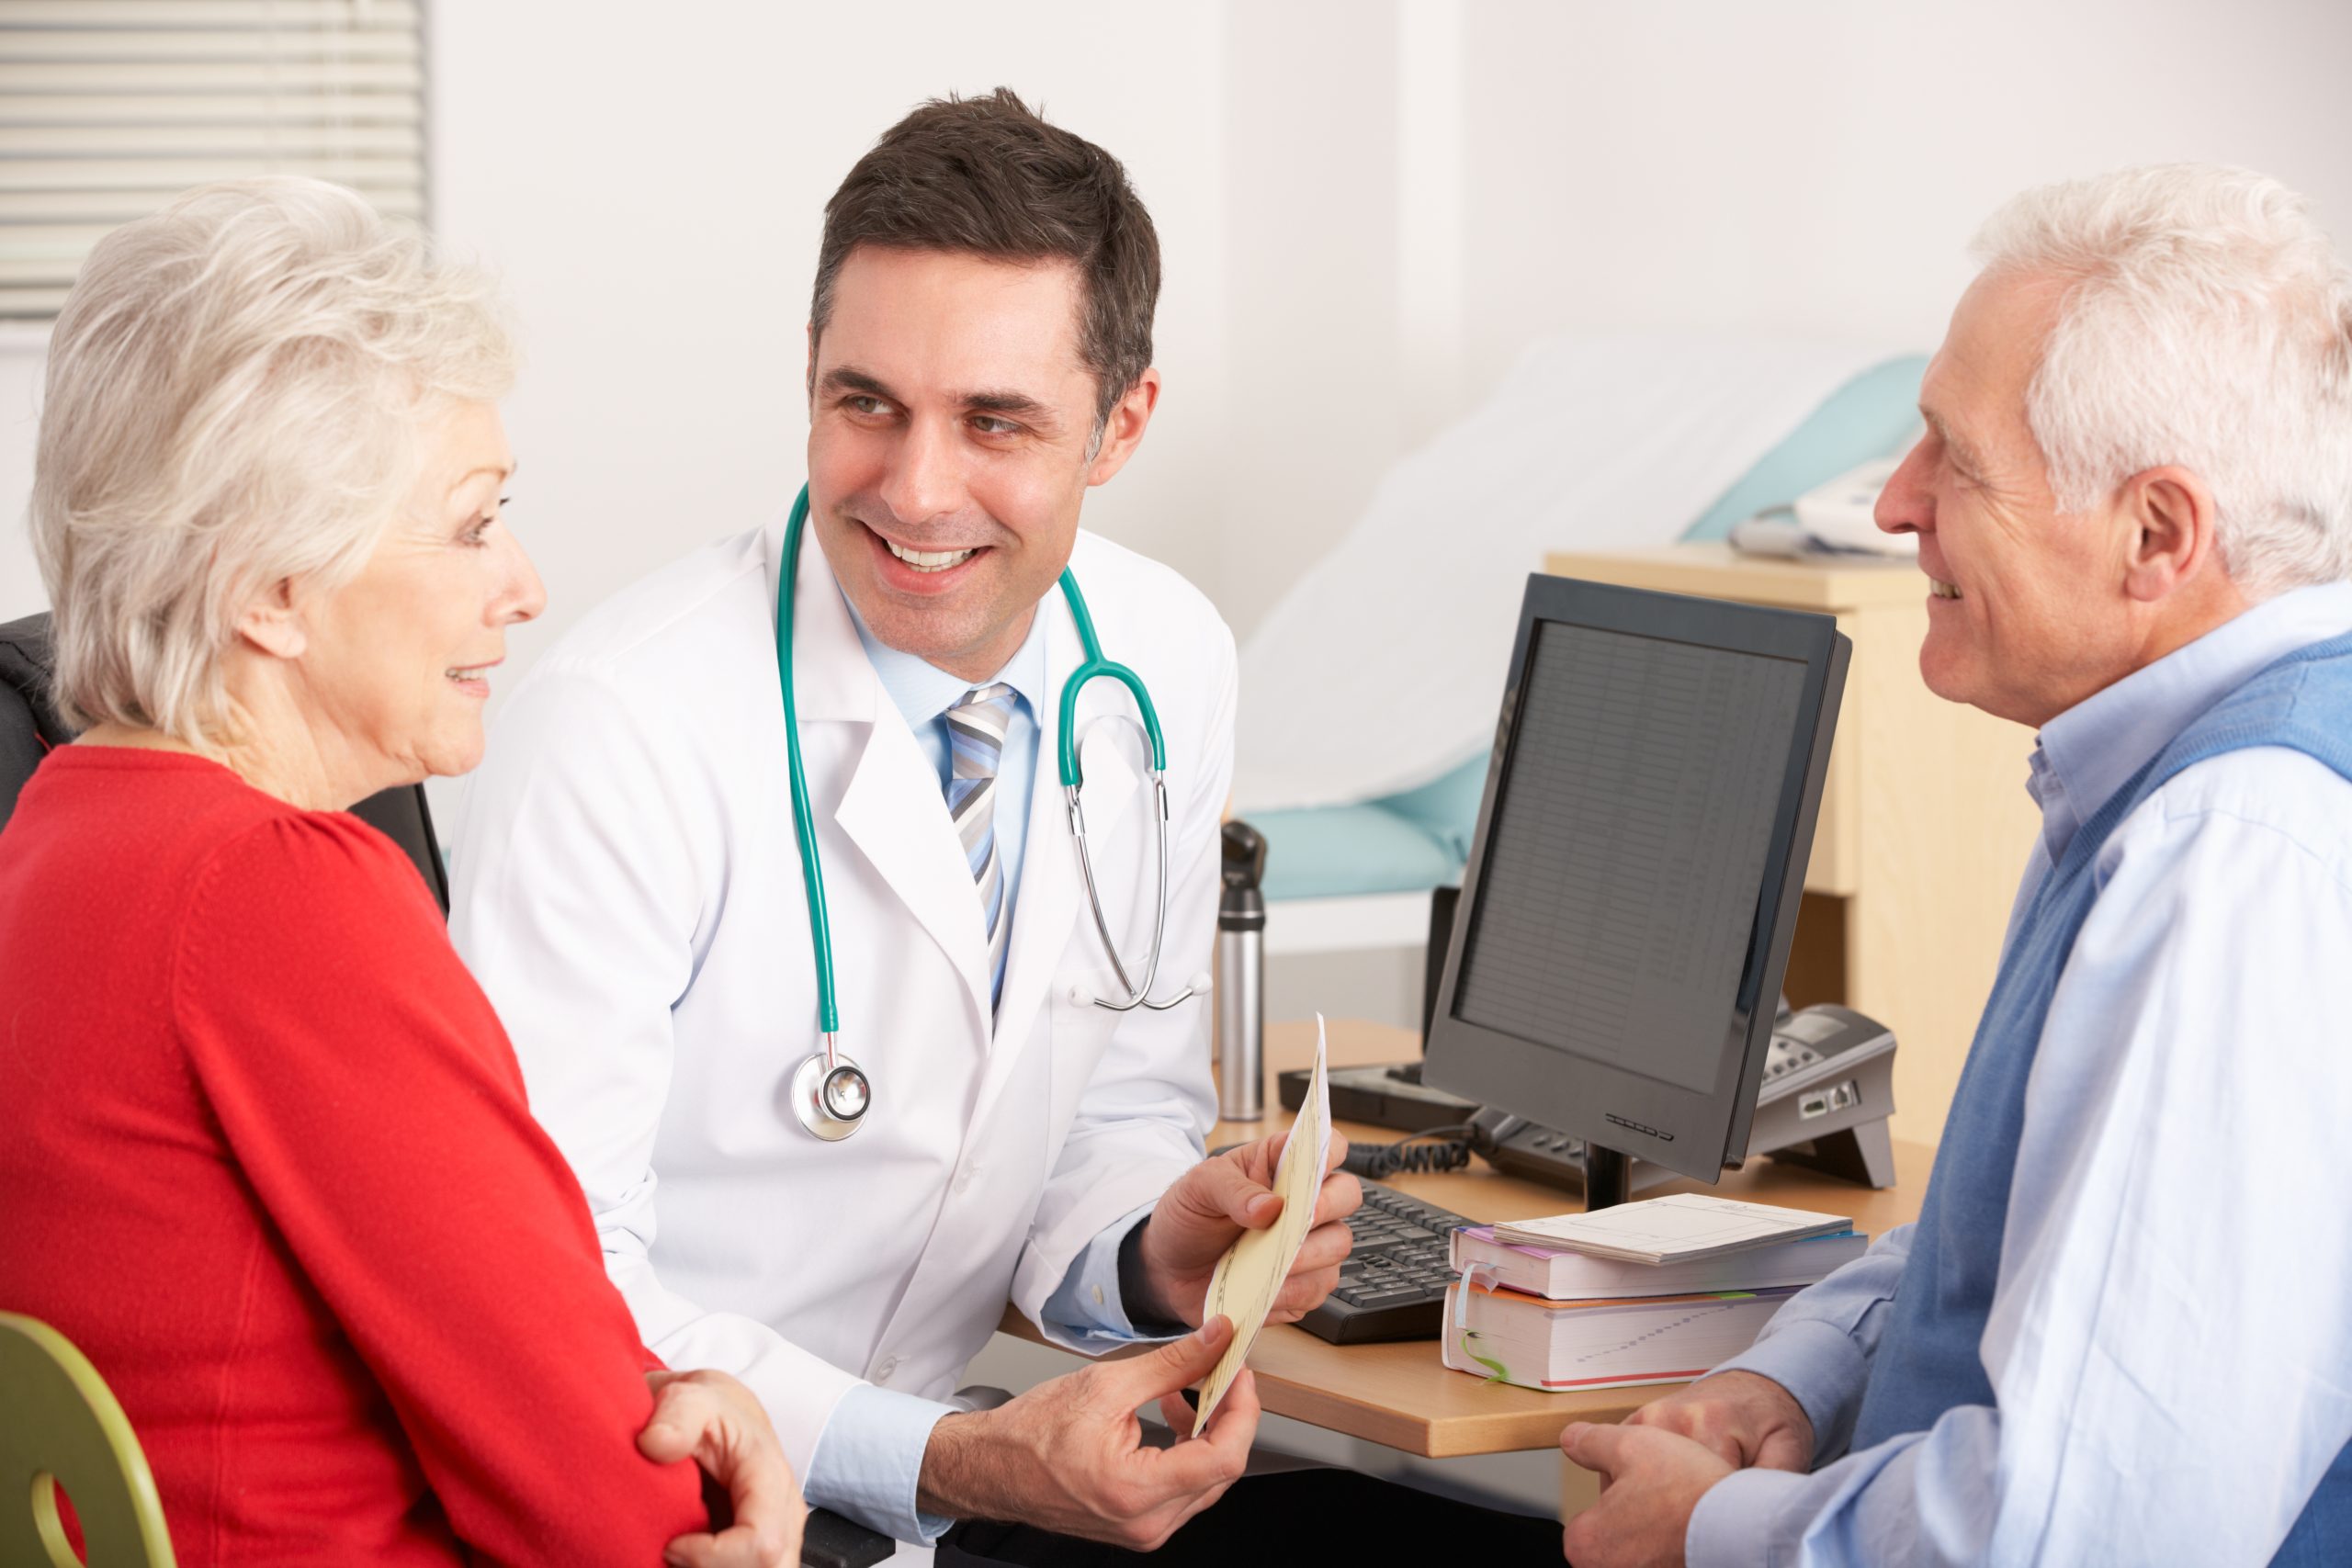 Medicare’s Annual Wellness Visit is your “Concierge Service”